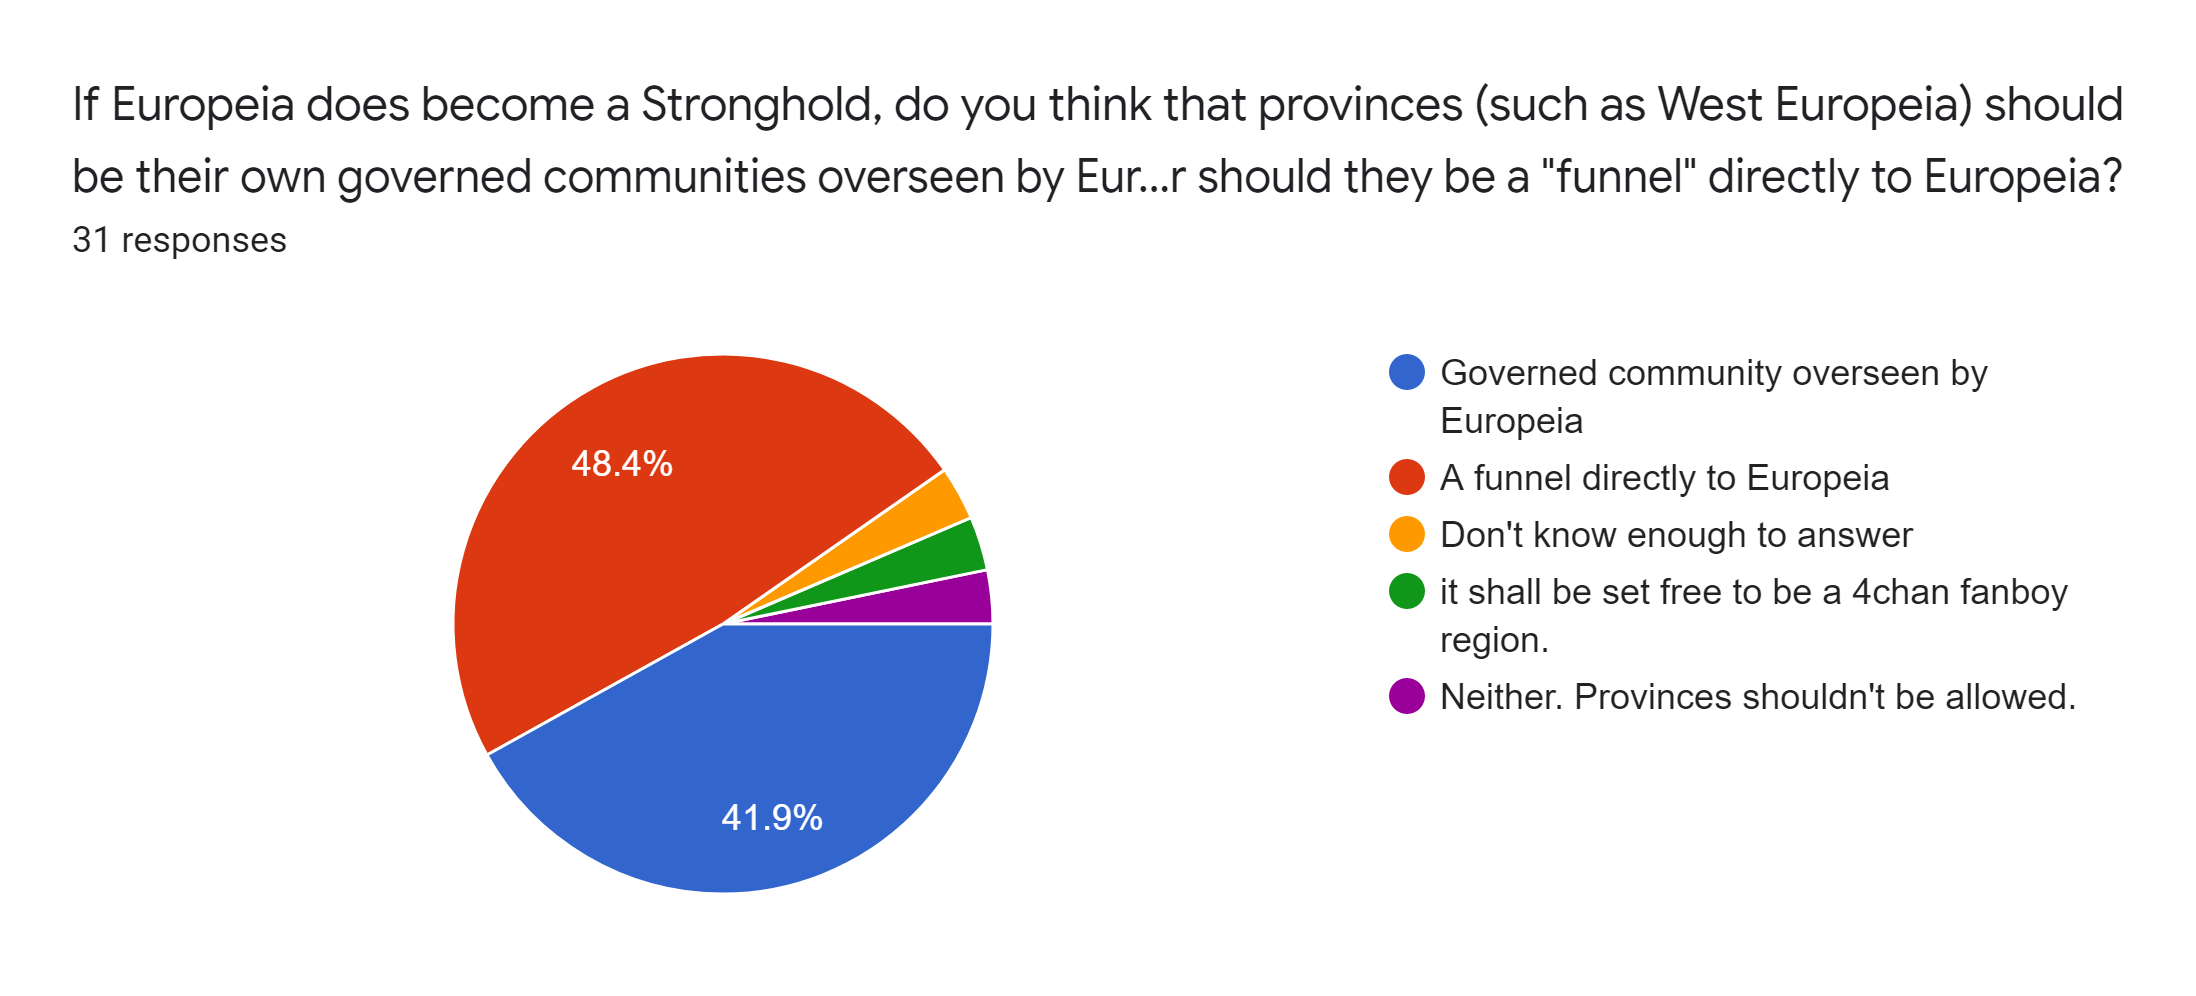 Forms response chart. Question title: If Europeia does become a Stronghold, do you think that provinces (such as West Europeia) should be their own governed communities overseen by Europeia, or should they be a funnel directly to Europeia?. Number of responses: 31 responses.